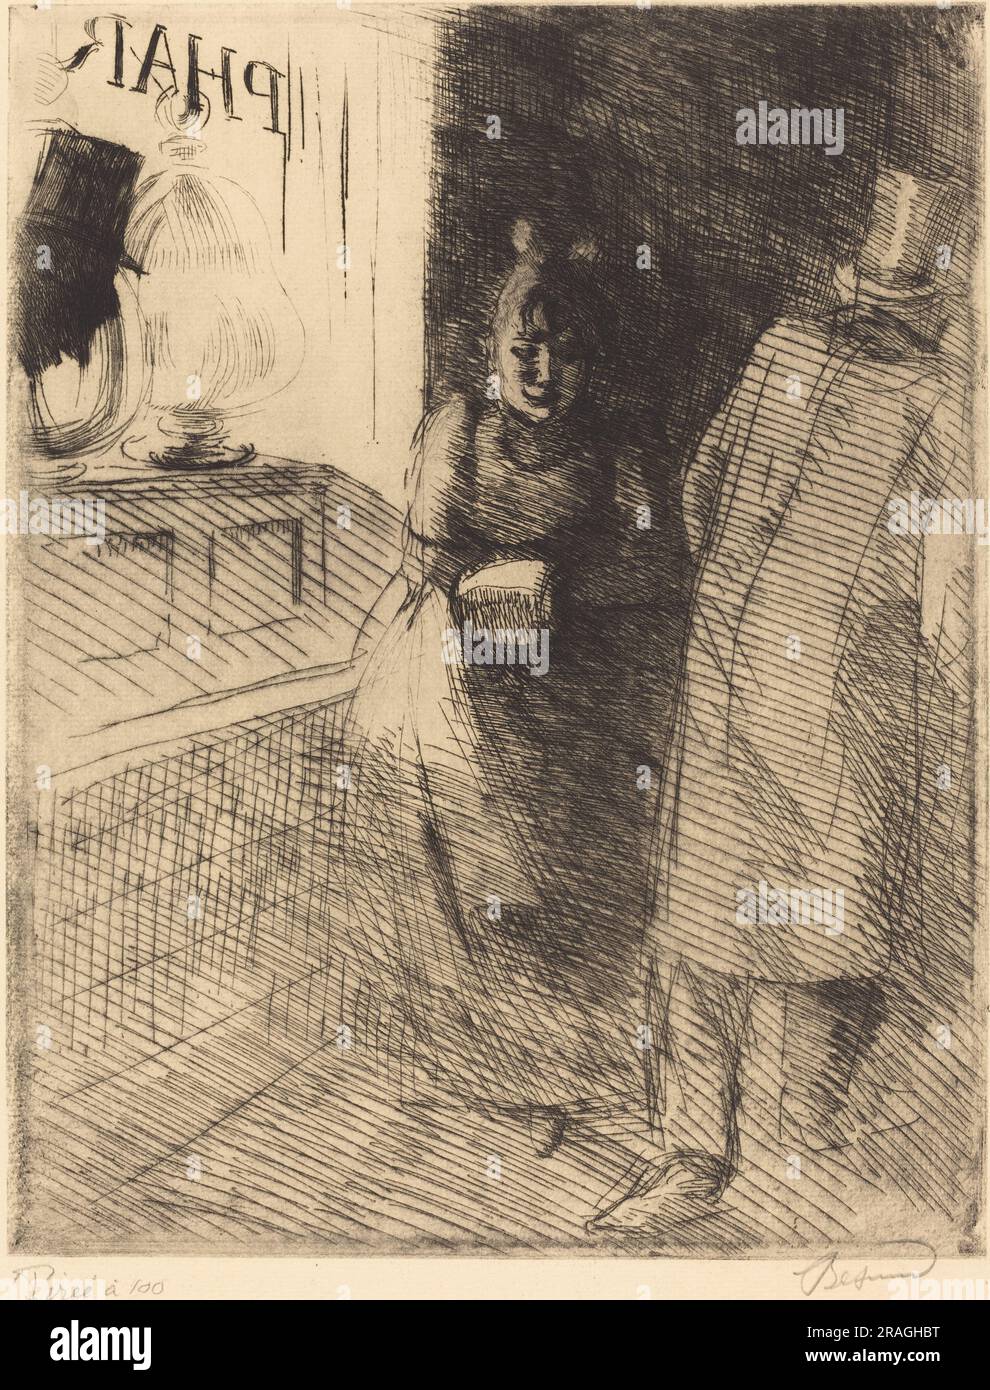 'Albert Besnard, Prostitution (La Prostitution), c. 1886, etching and drypoint on laid paper, plate: 31.6 x 24.6 cm (12 7/16 x 9 11/16 in.) sheet: 50.5 x 32.5 cm (19 7/8 x 12 13/16 in.), Gift of Mr. and Mrs. Daniel Bell, 1996.136.5' Stock Photo